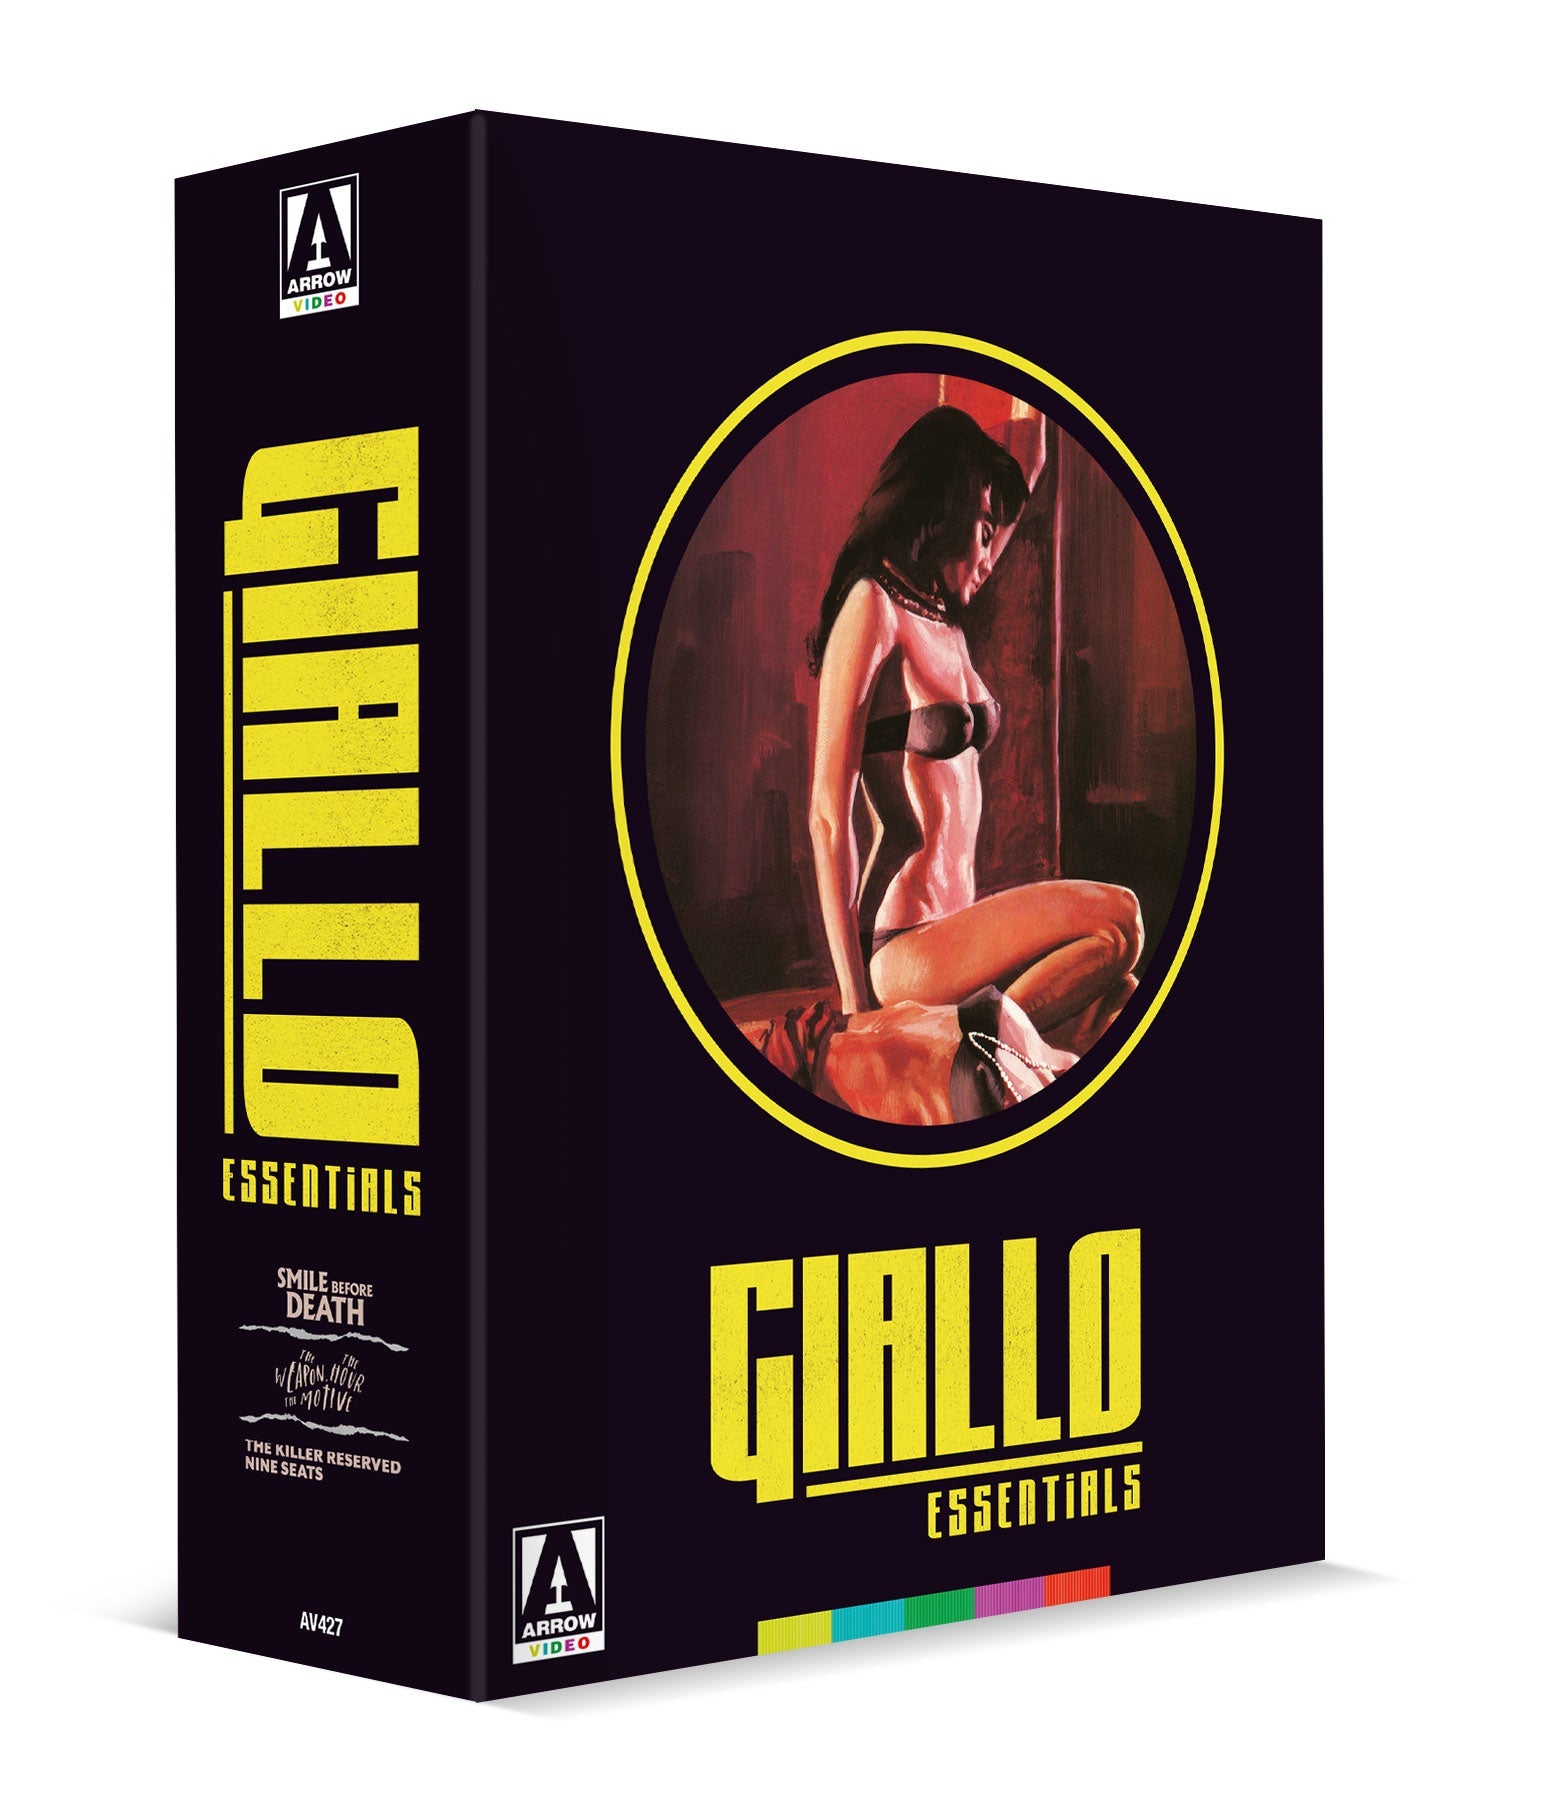 GIALLO ESSENTIALS (BLACK EDITION - LIMITED EDITION) BLU-RAY [SCRATCH AND DENT]